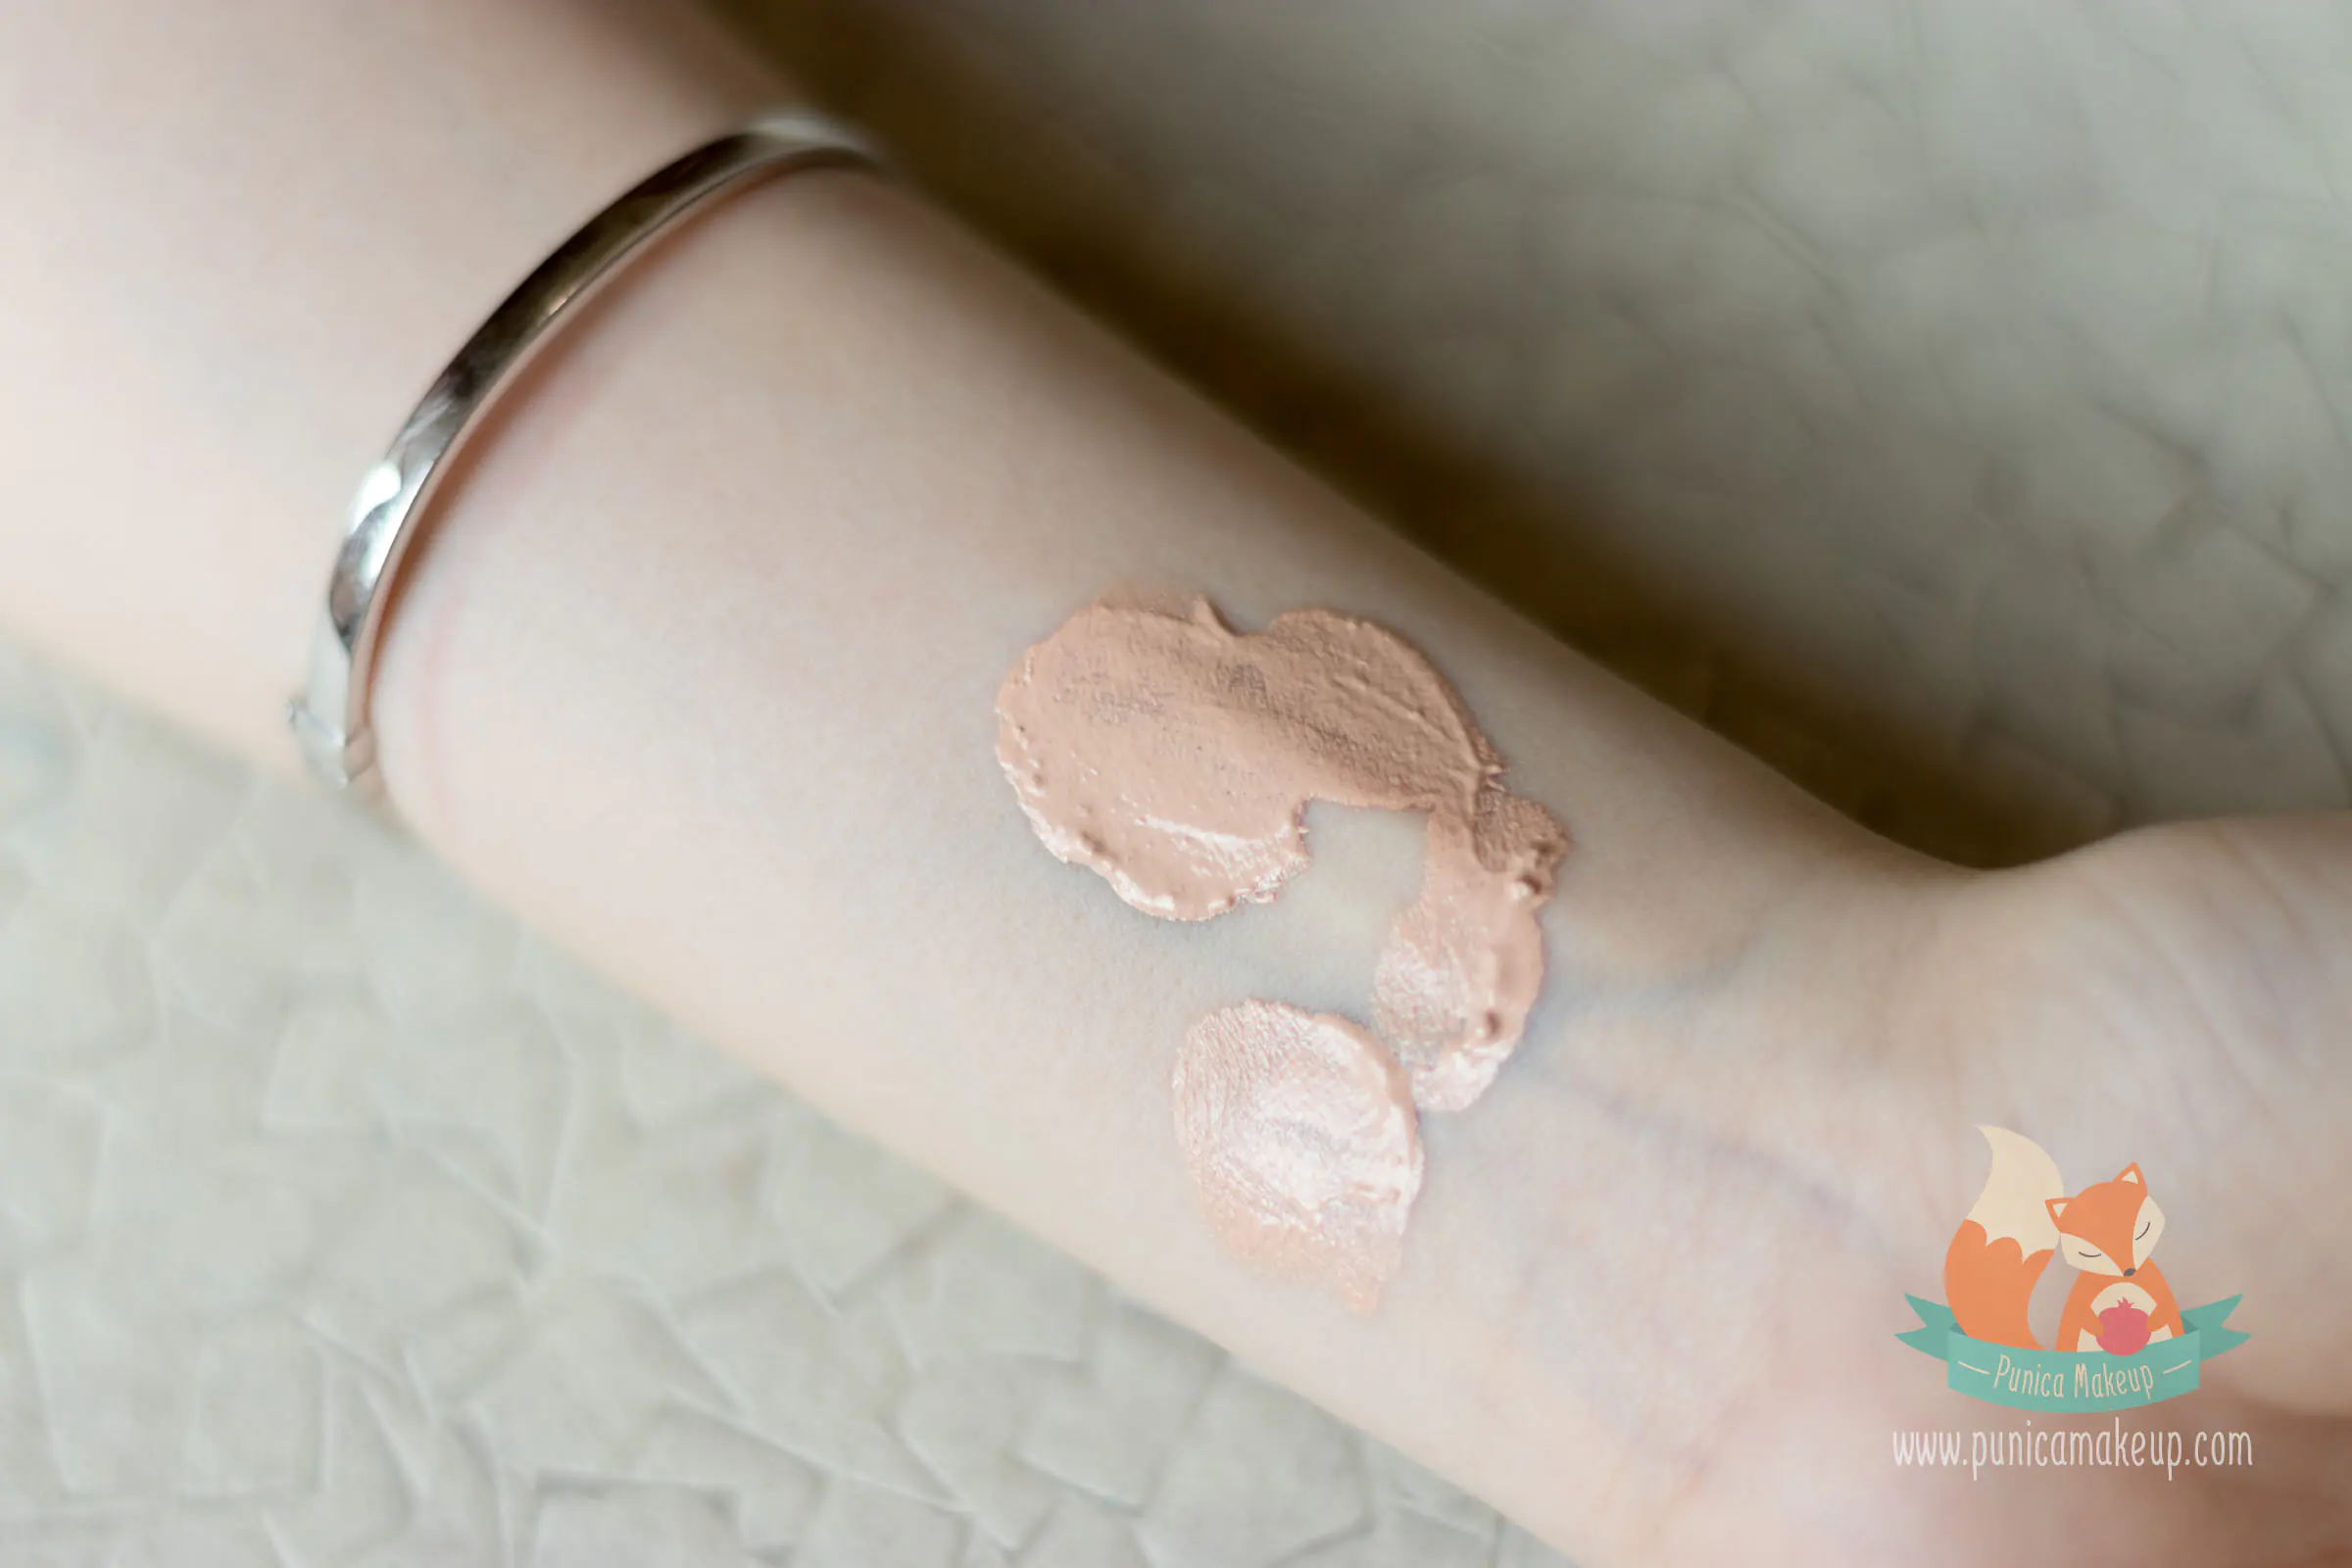 bareMinerals Complexion Rescue tested on my skin